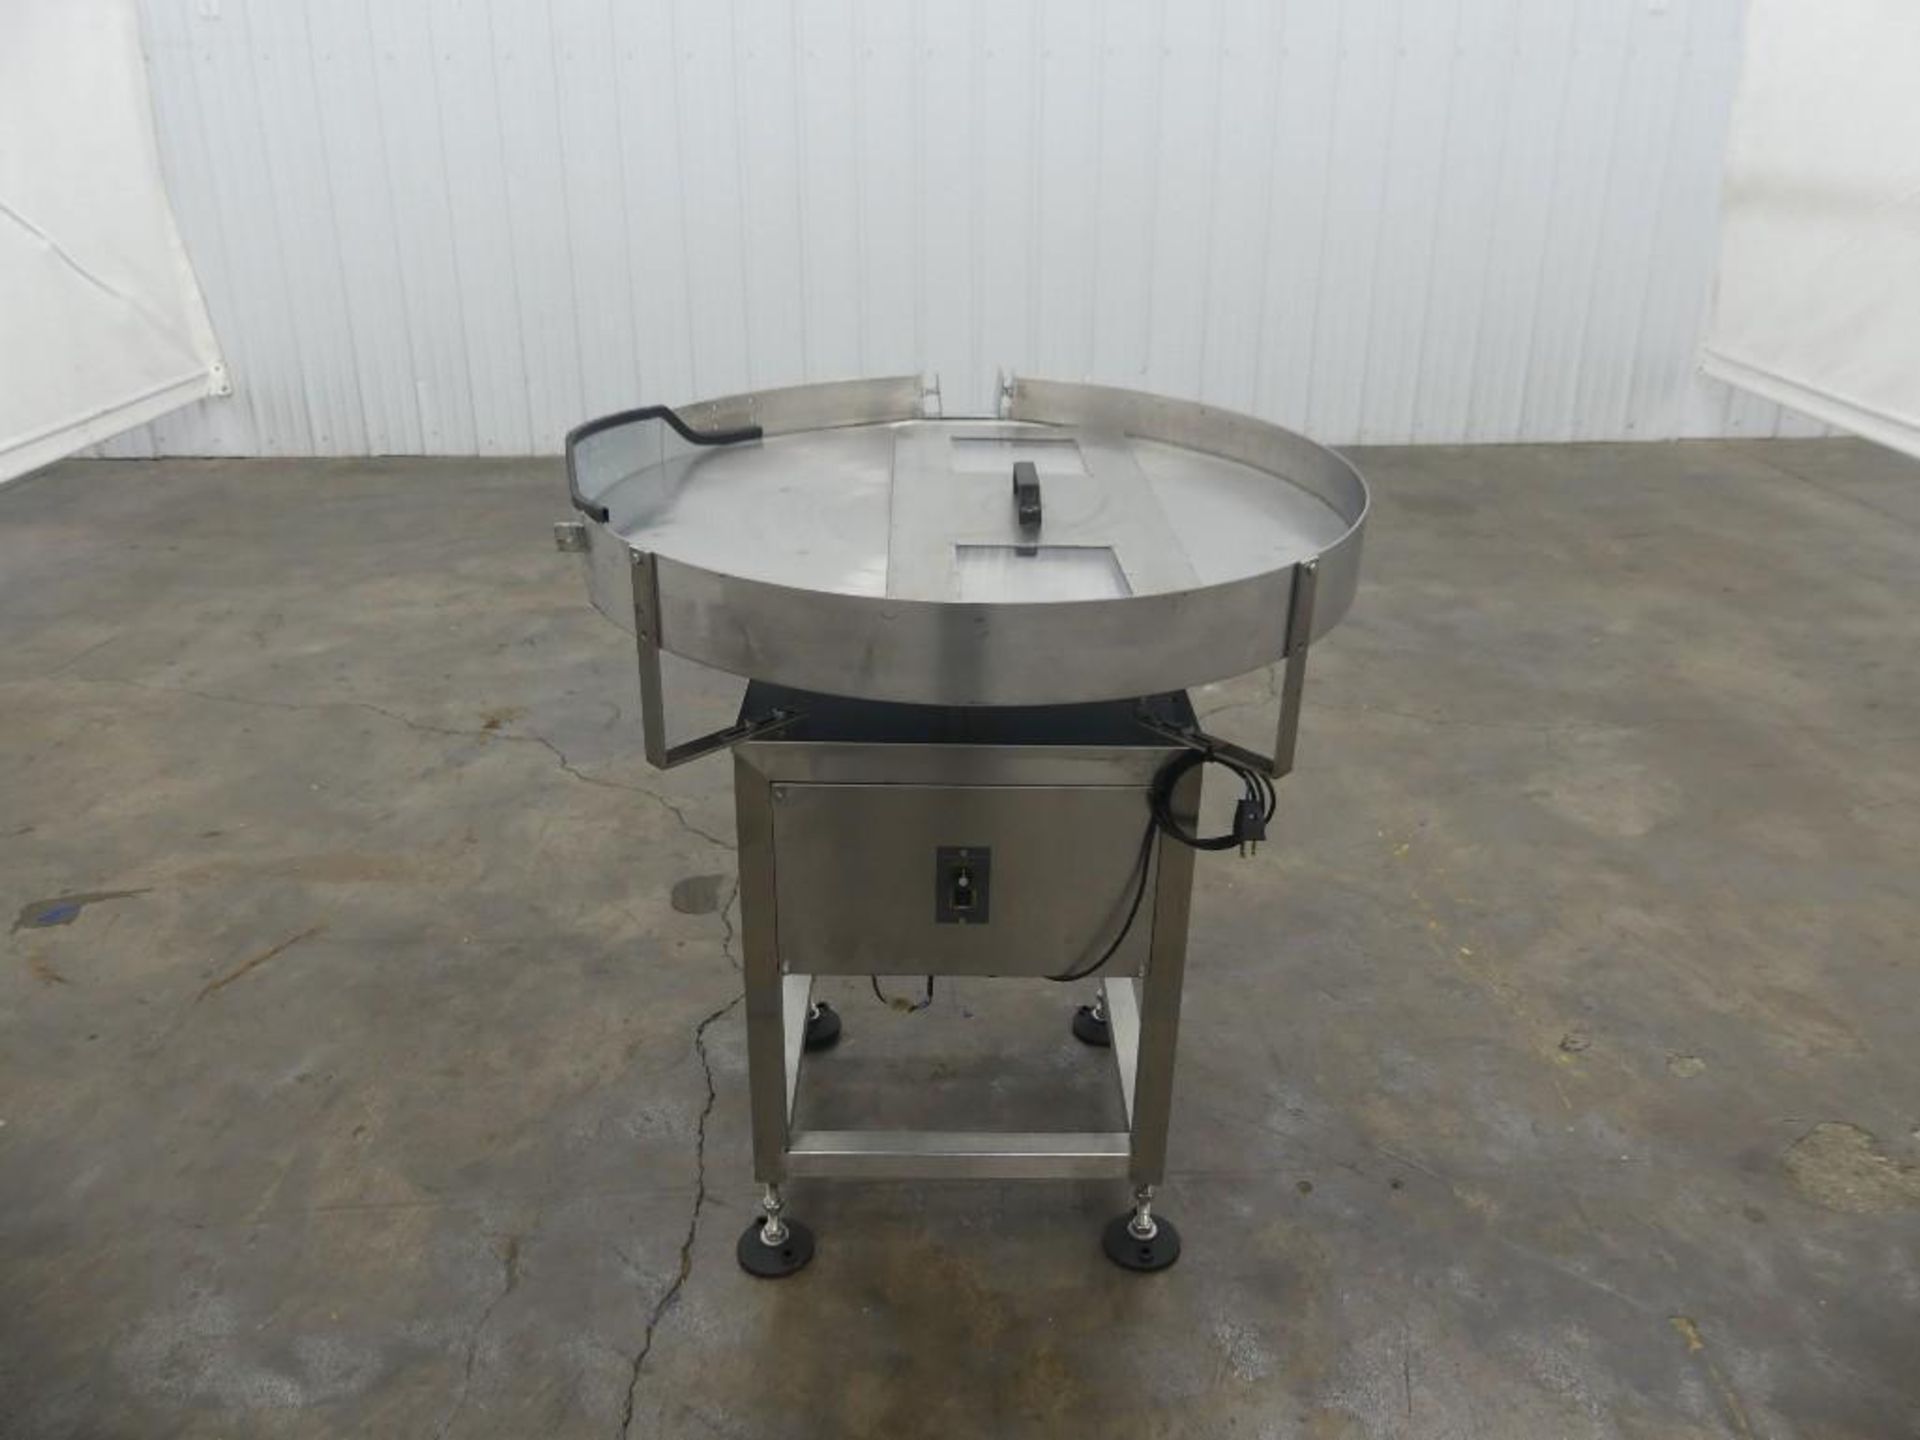 36 Inch Rotary Accumulation Table